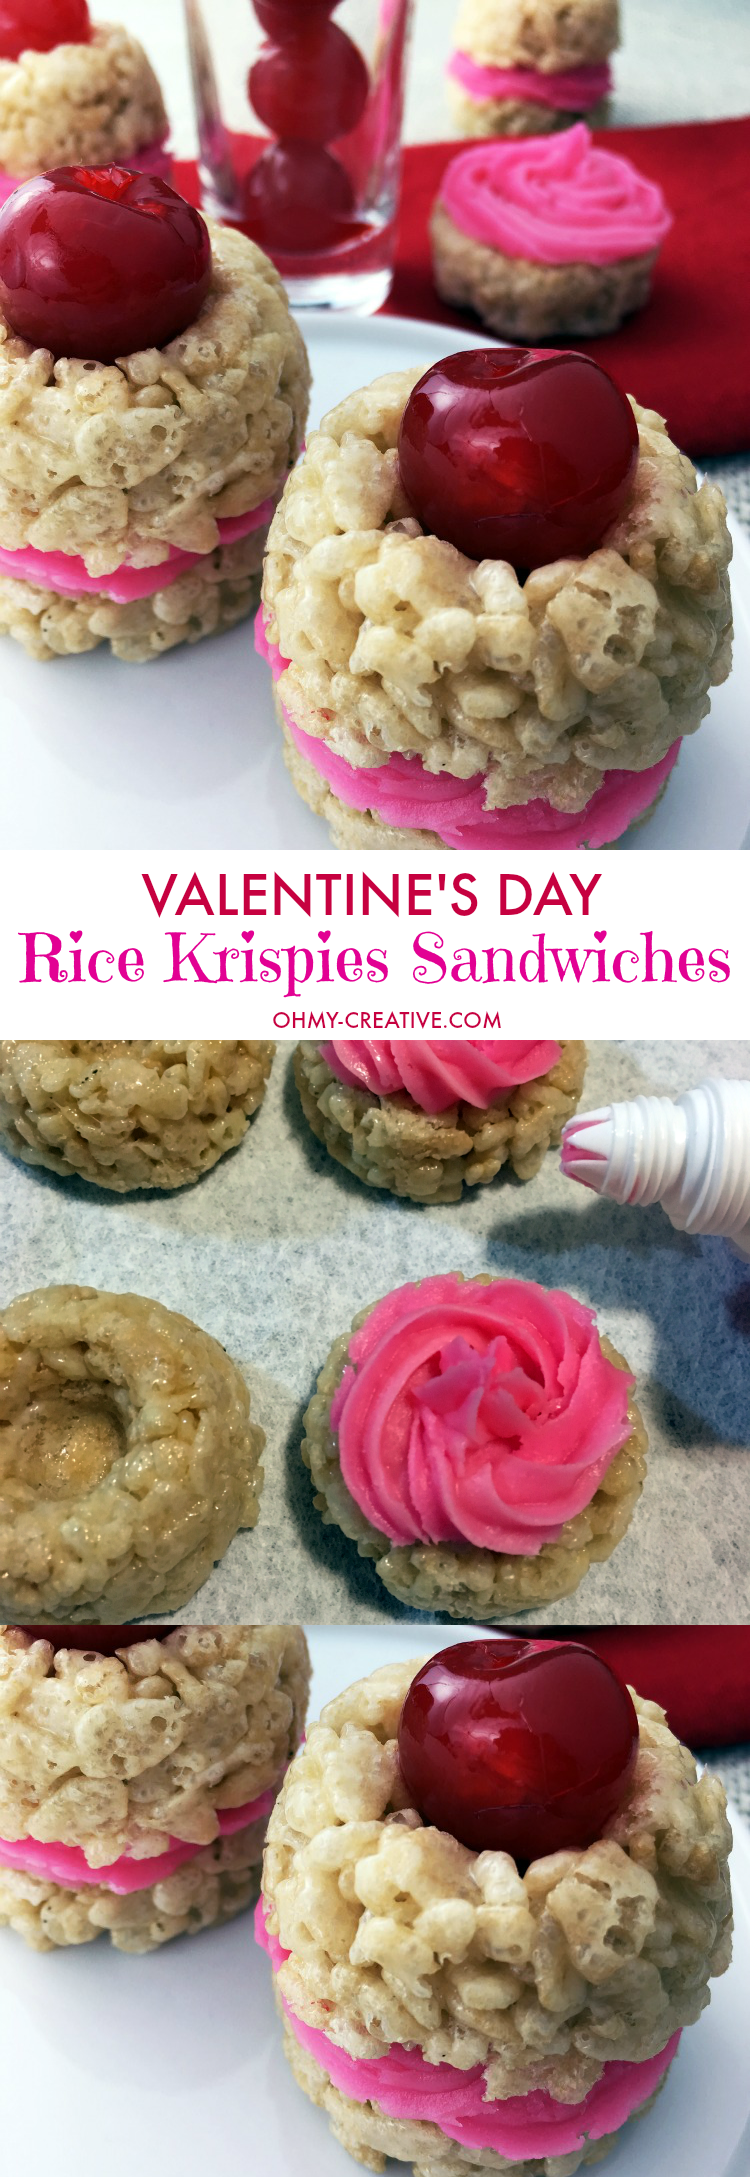 Valentine's Day Rice Krispie Treat Sandwiches - easy to make and sweet to eat! | OHMY-CREATIVE.COM